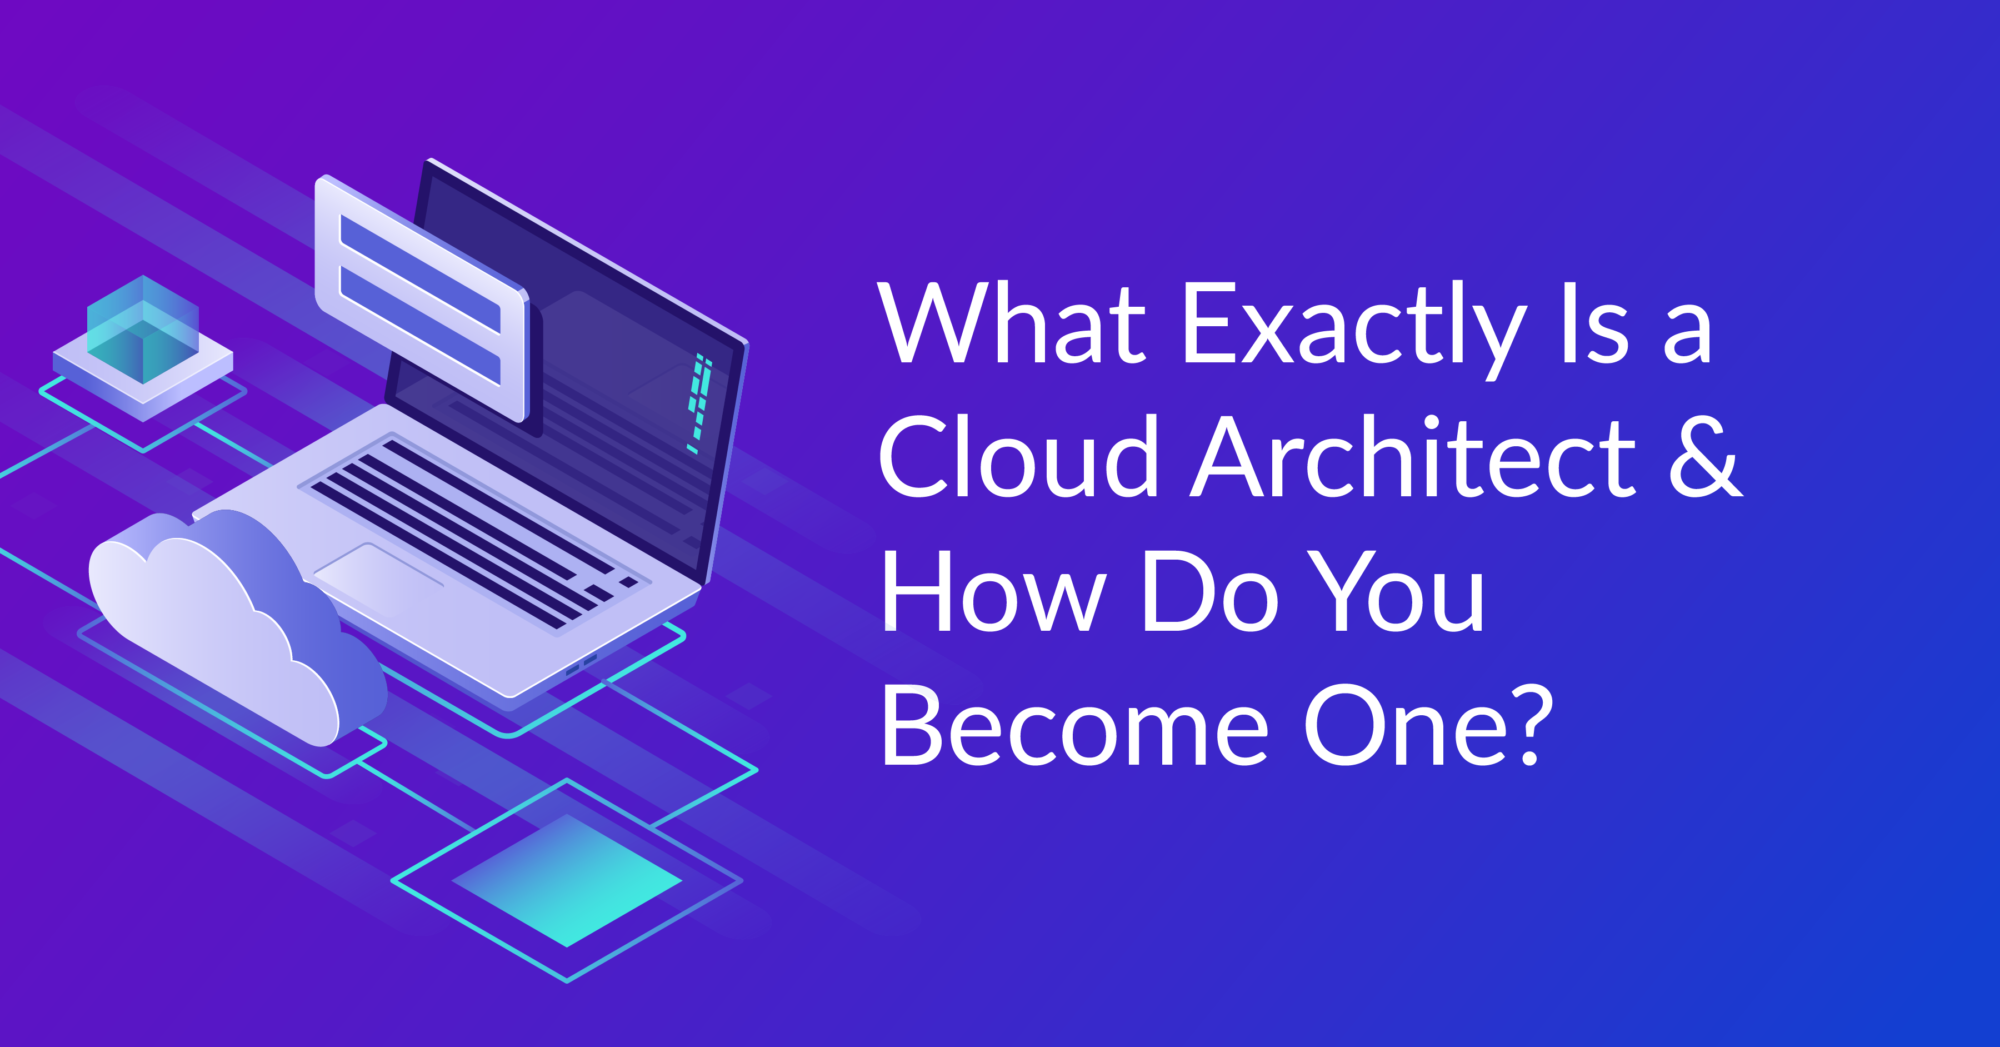 What Exactly Is a Cloud Architect and How Do You Become One?